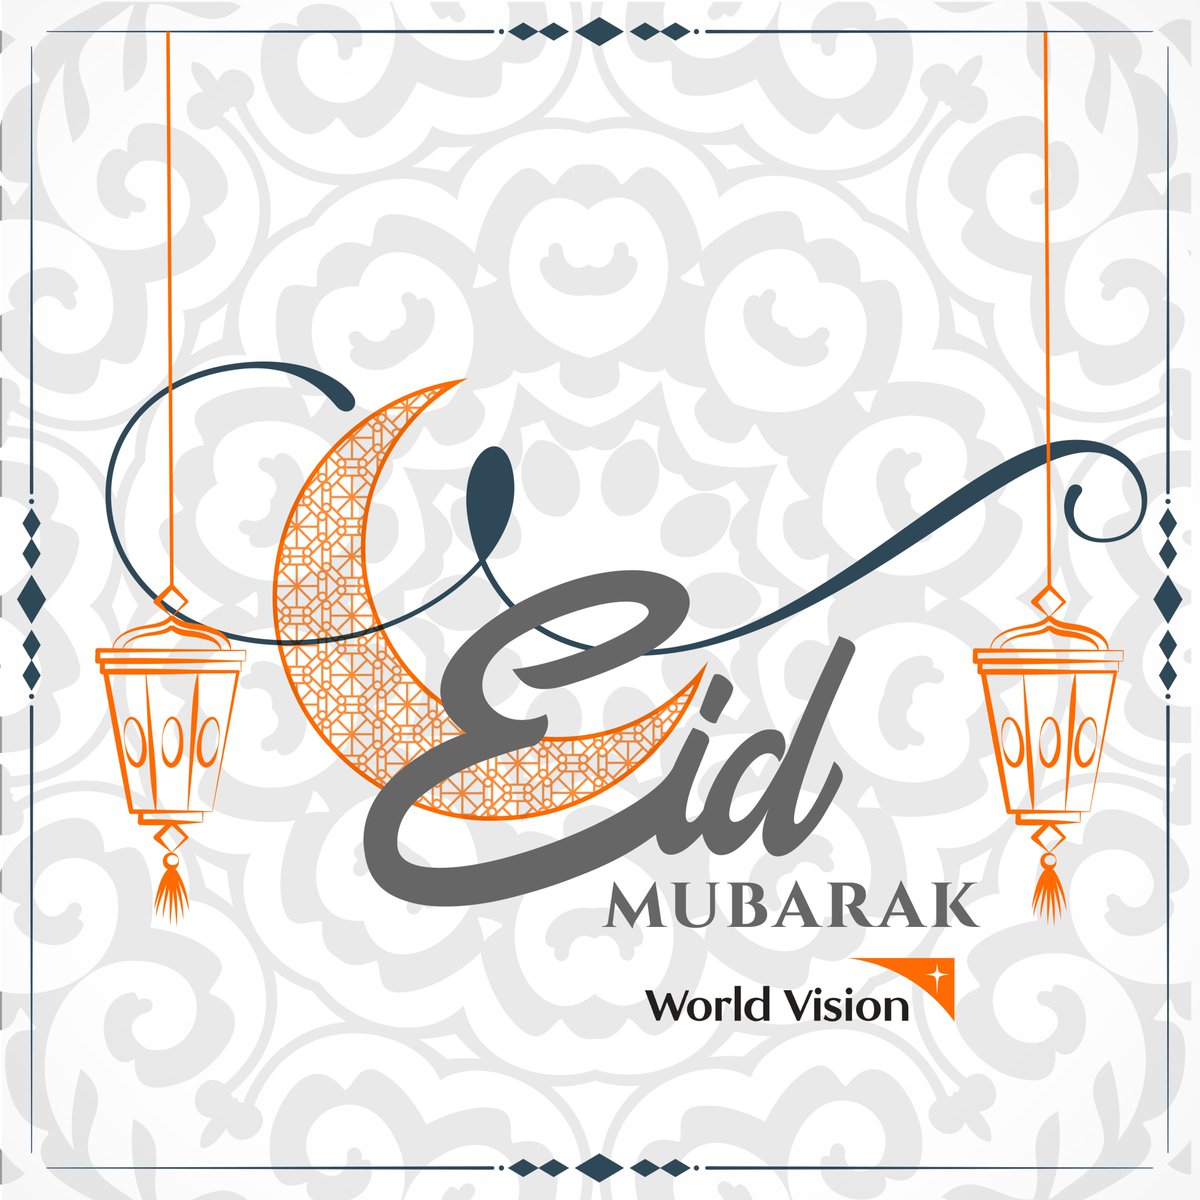 After the Holy month of Ramadan, @WorldVisionSR family wishes Eid Fitir Mubarak upon you and your families. May this year bring the world closer together.